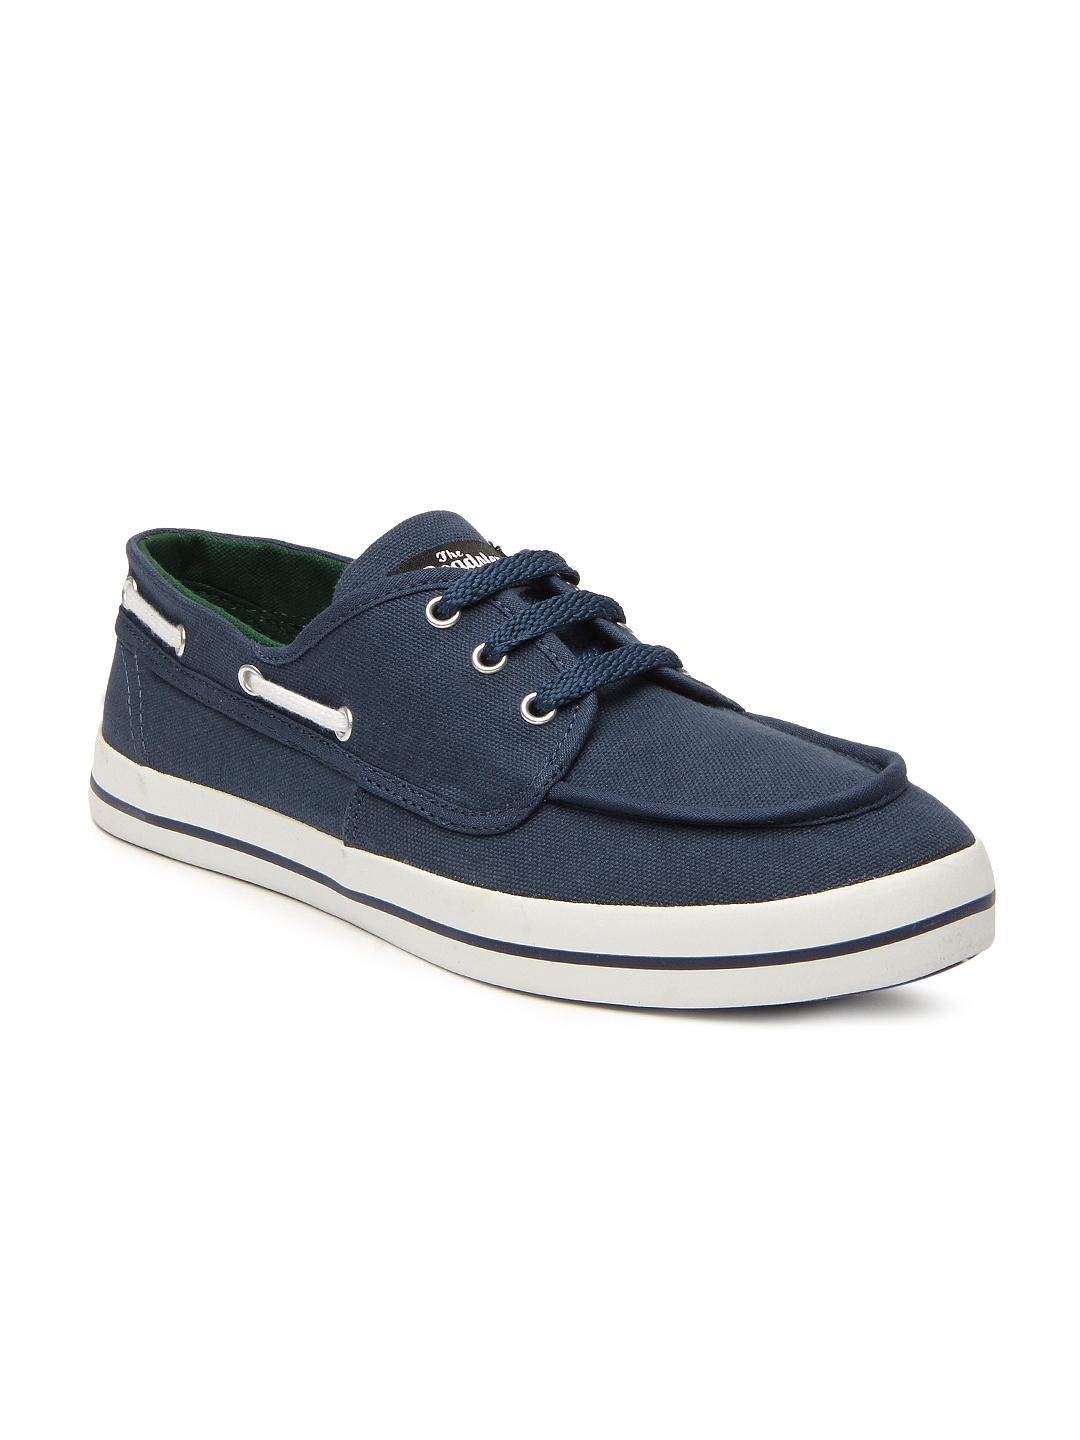 Buy Roadster Men Navy Casual Shoes - Casual Shoes for Men 366255 | Myntra